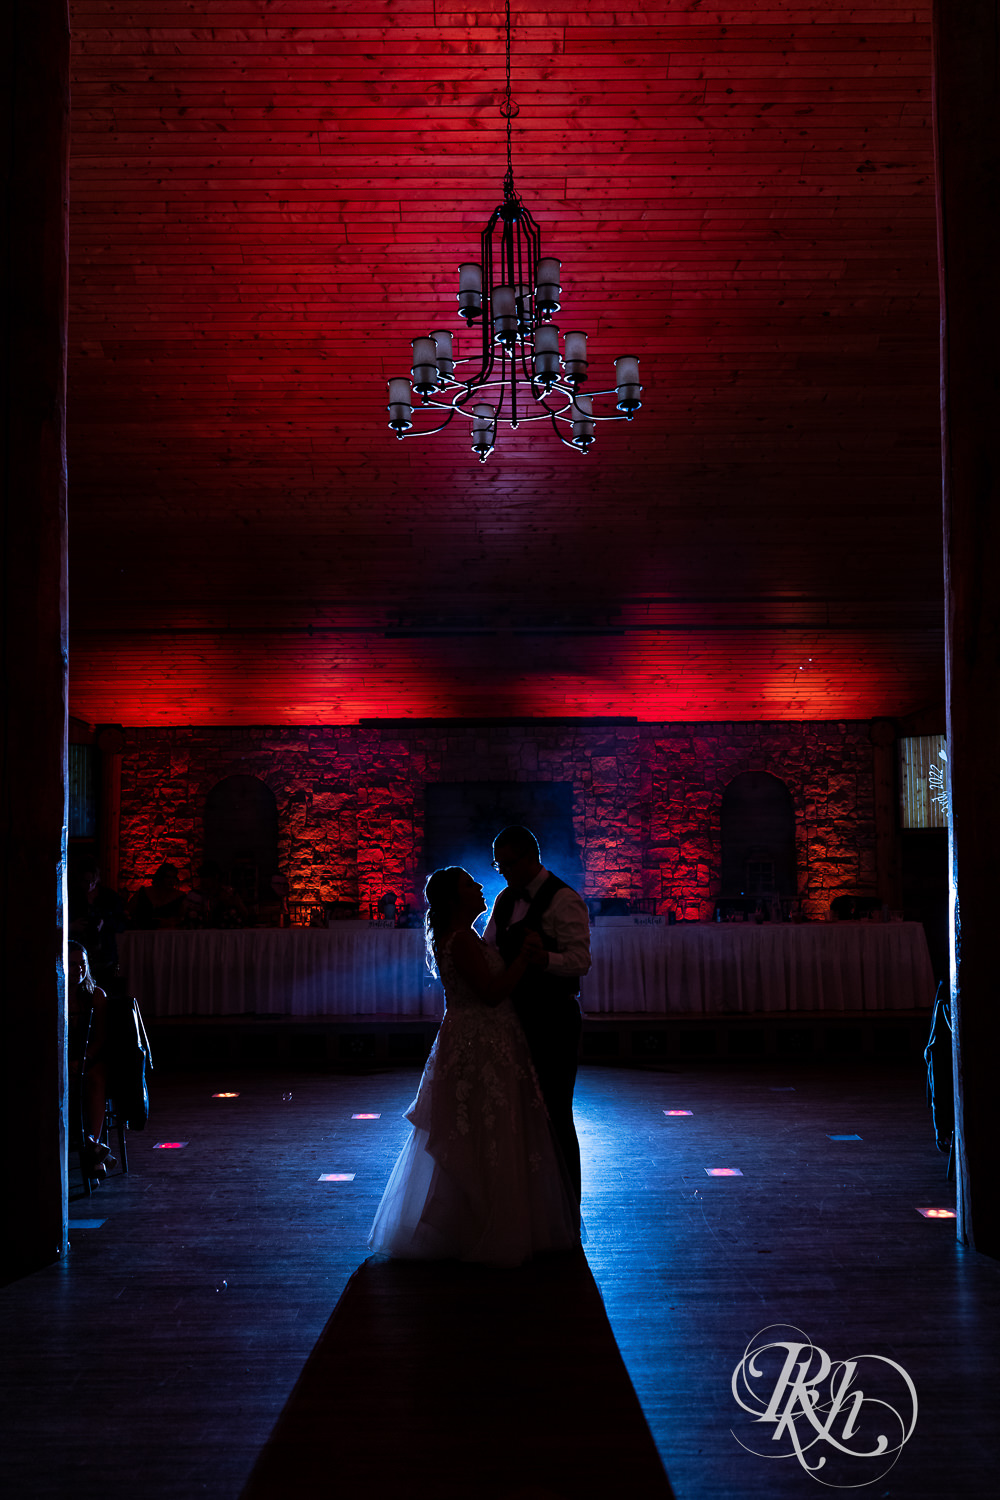 First dance with falling bubbles and smoke at Glenhaven Events in Farmington, Minnesota.